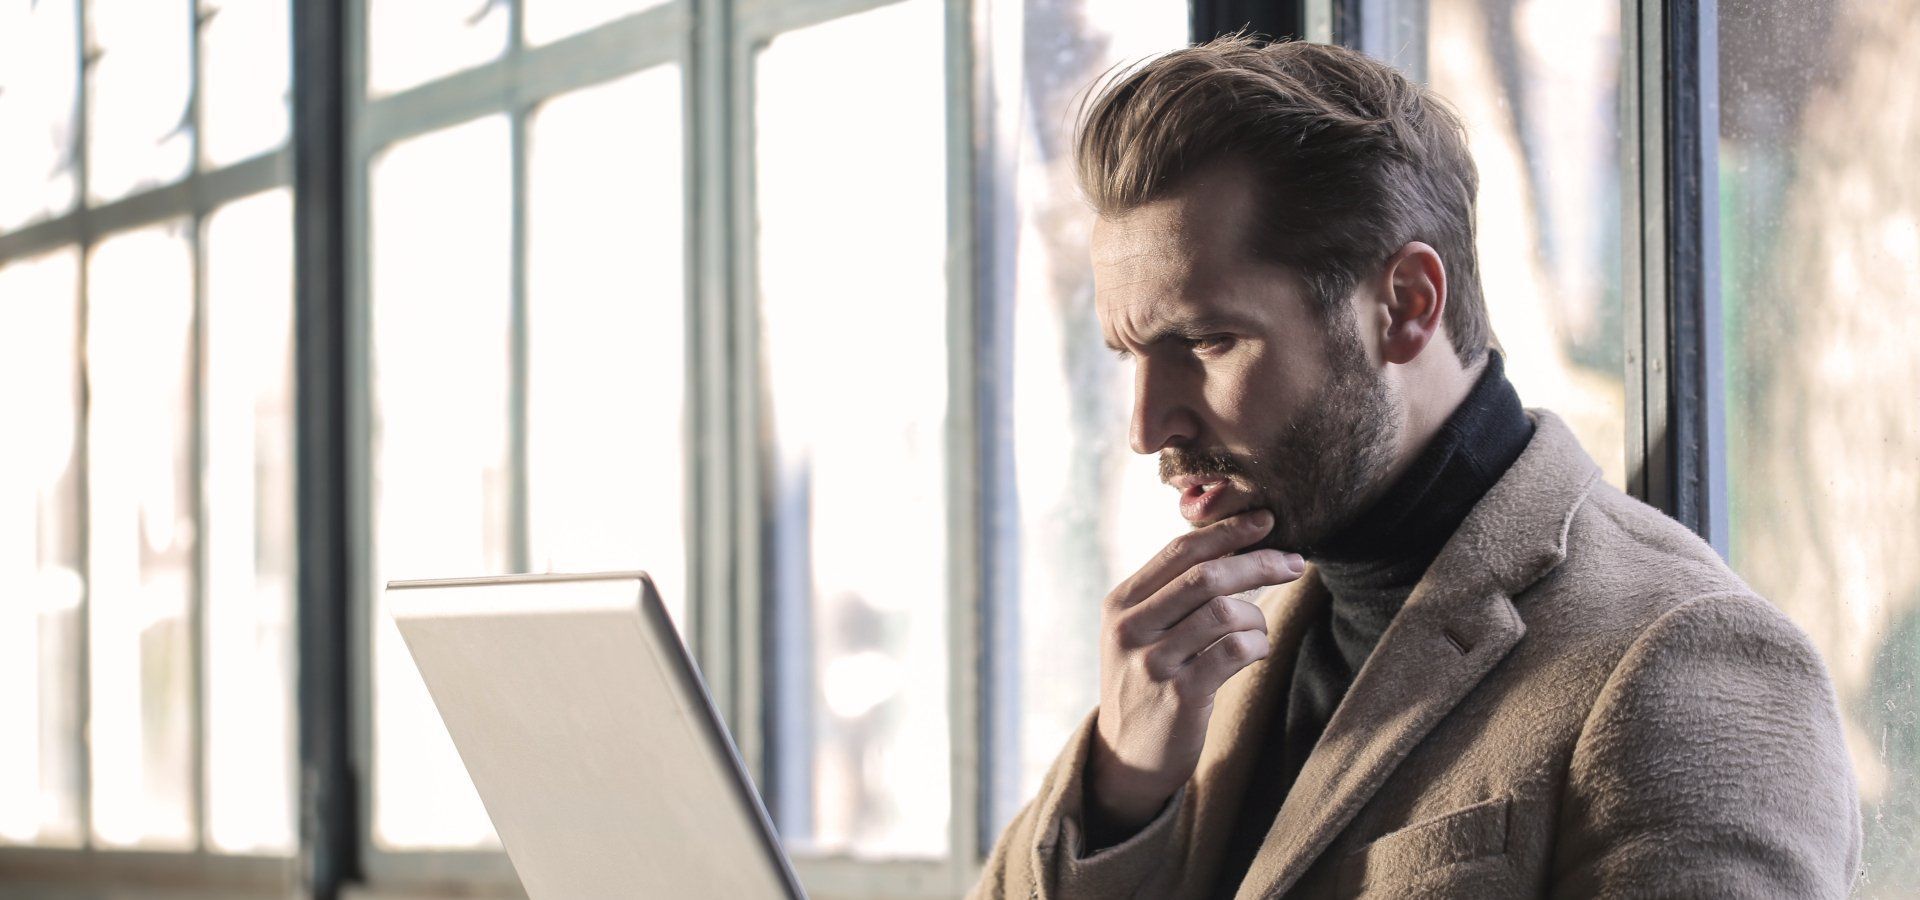 man searching internet, looking confused